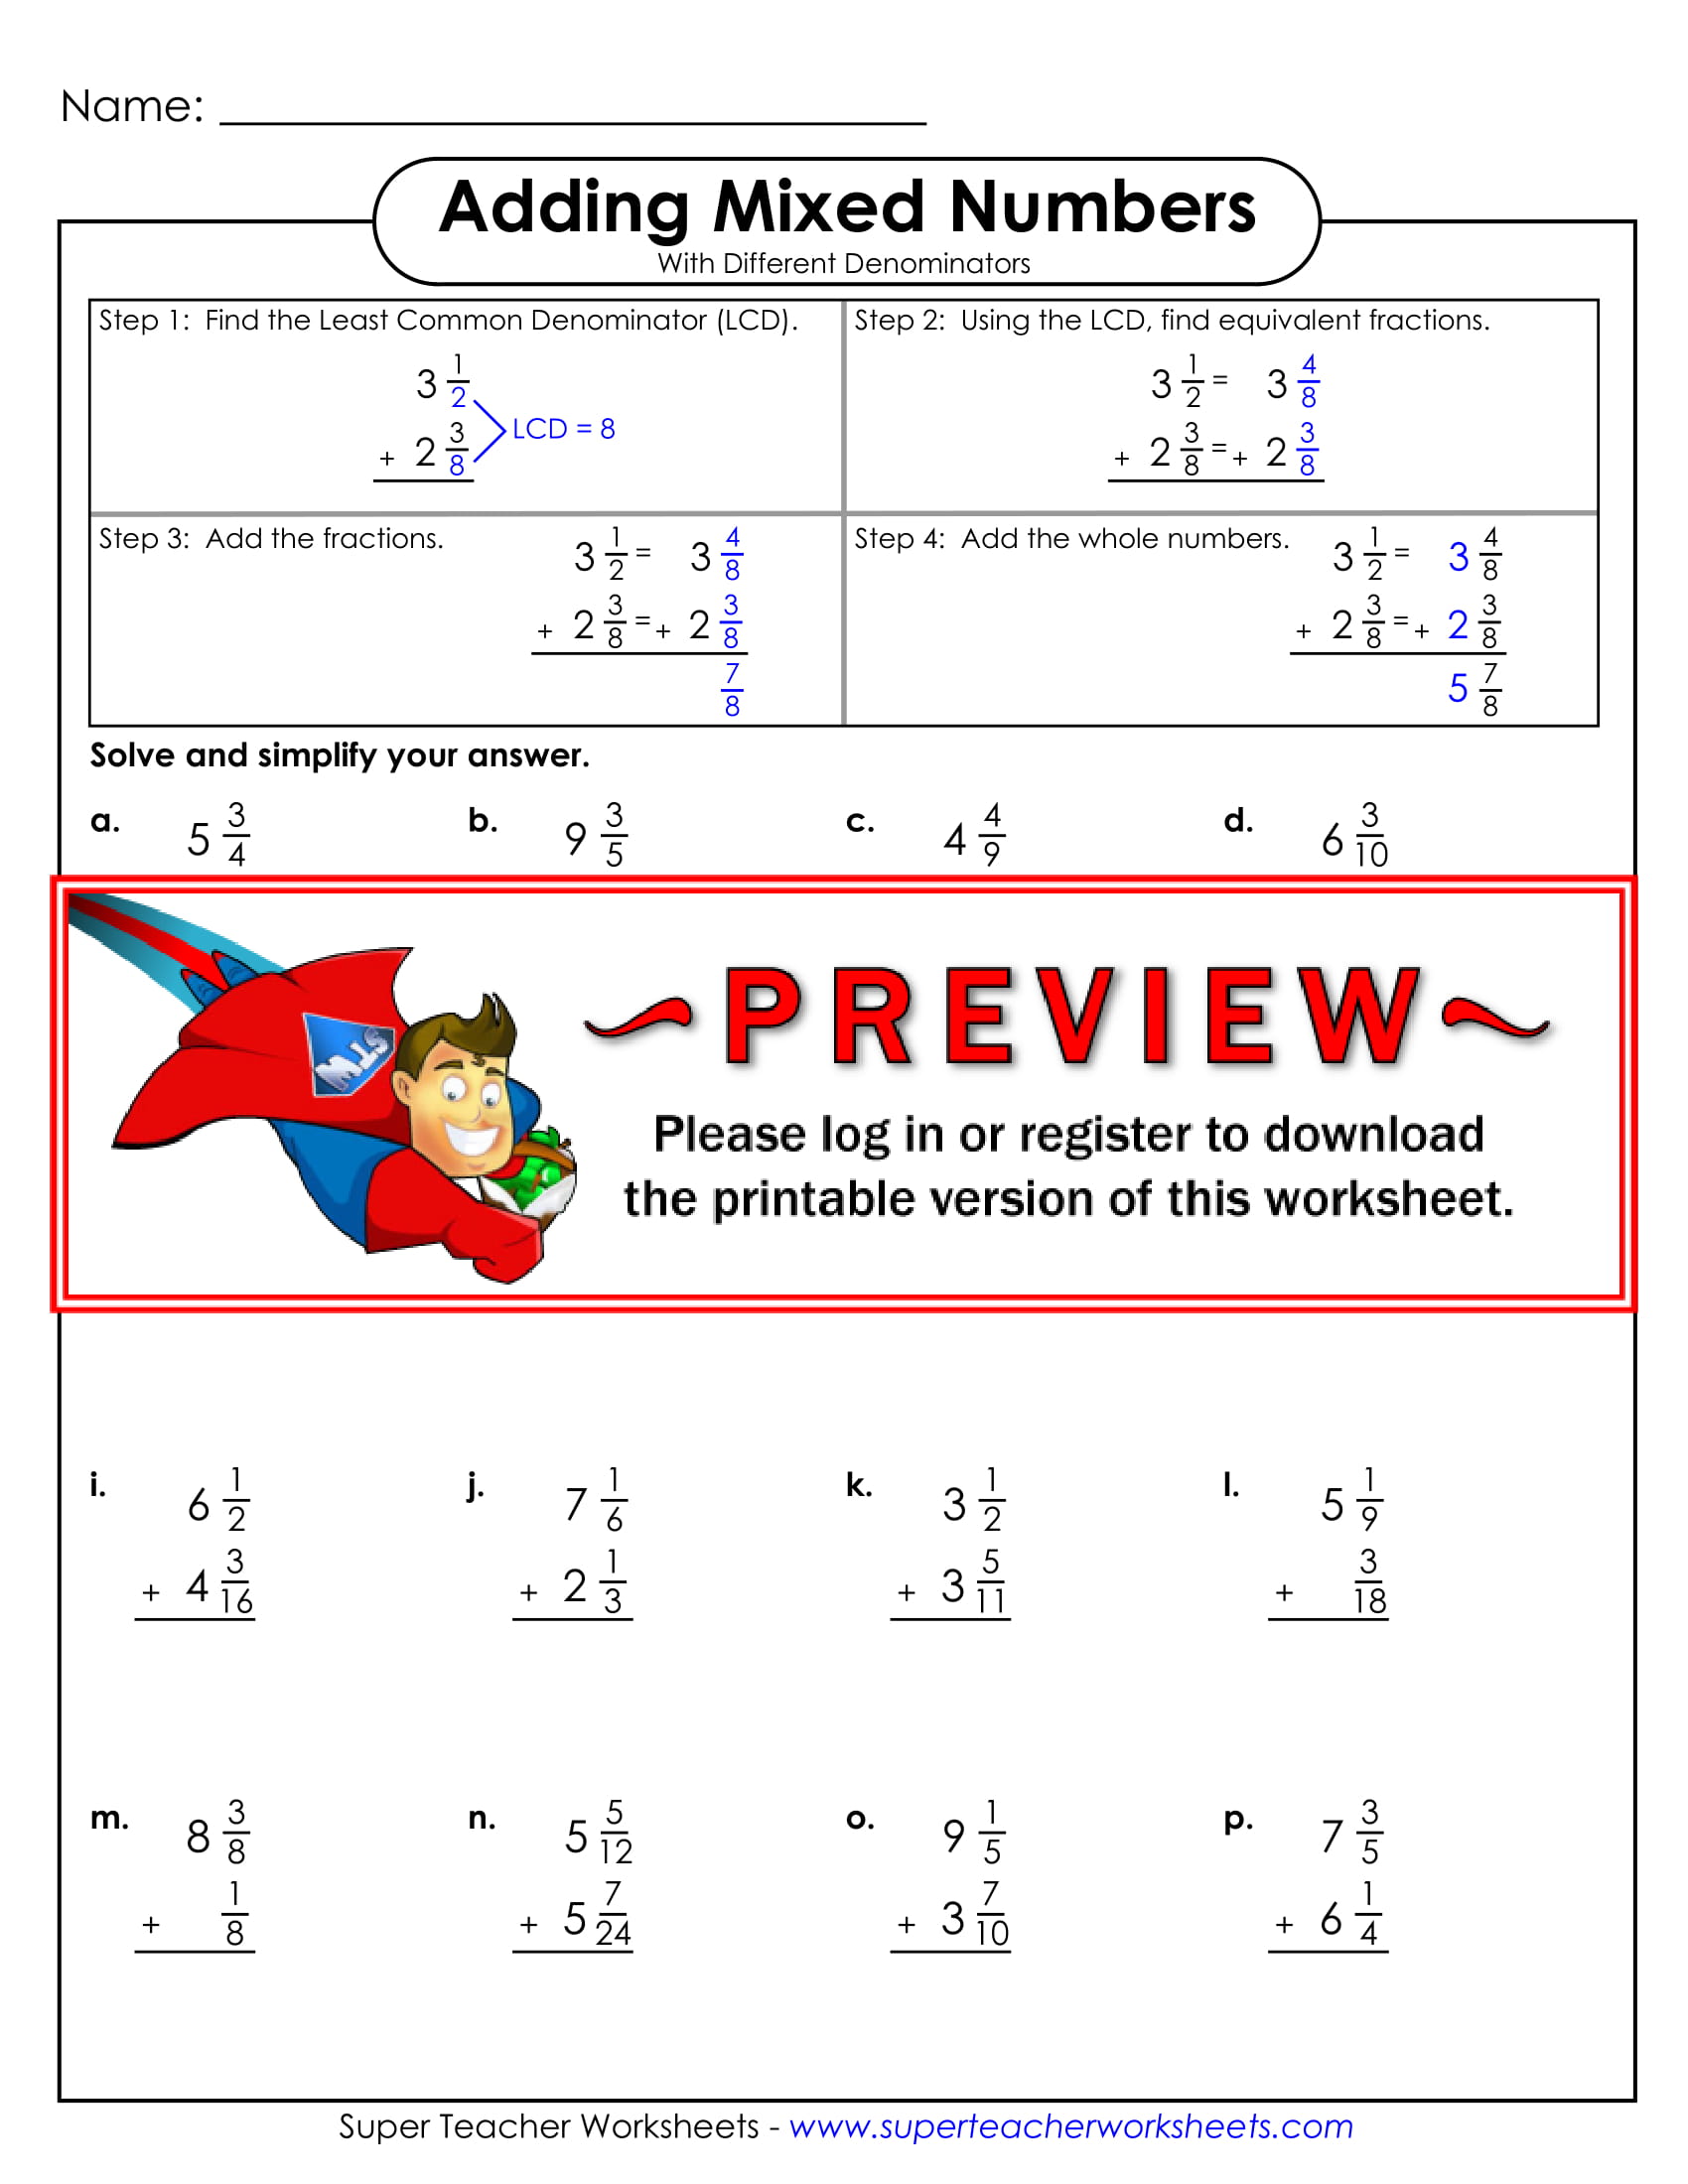 Adding Mixed Numbers Sample Worksheet